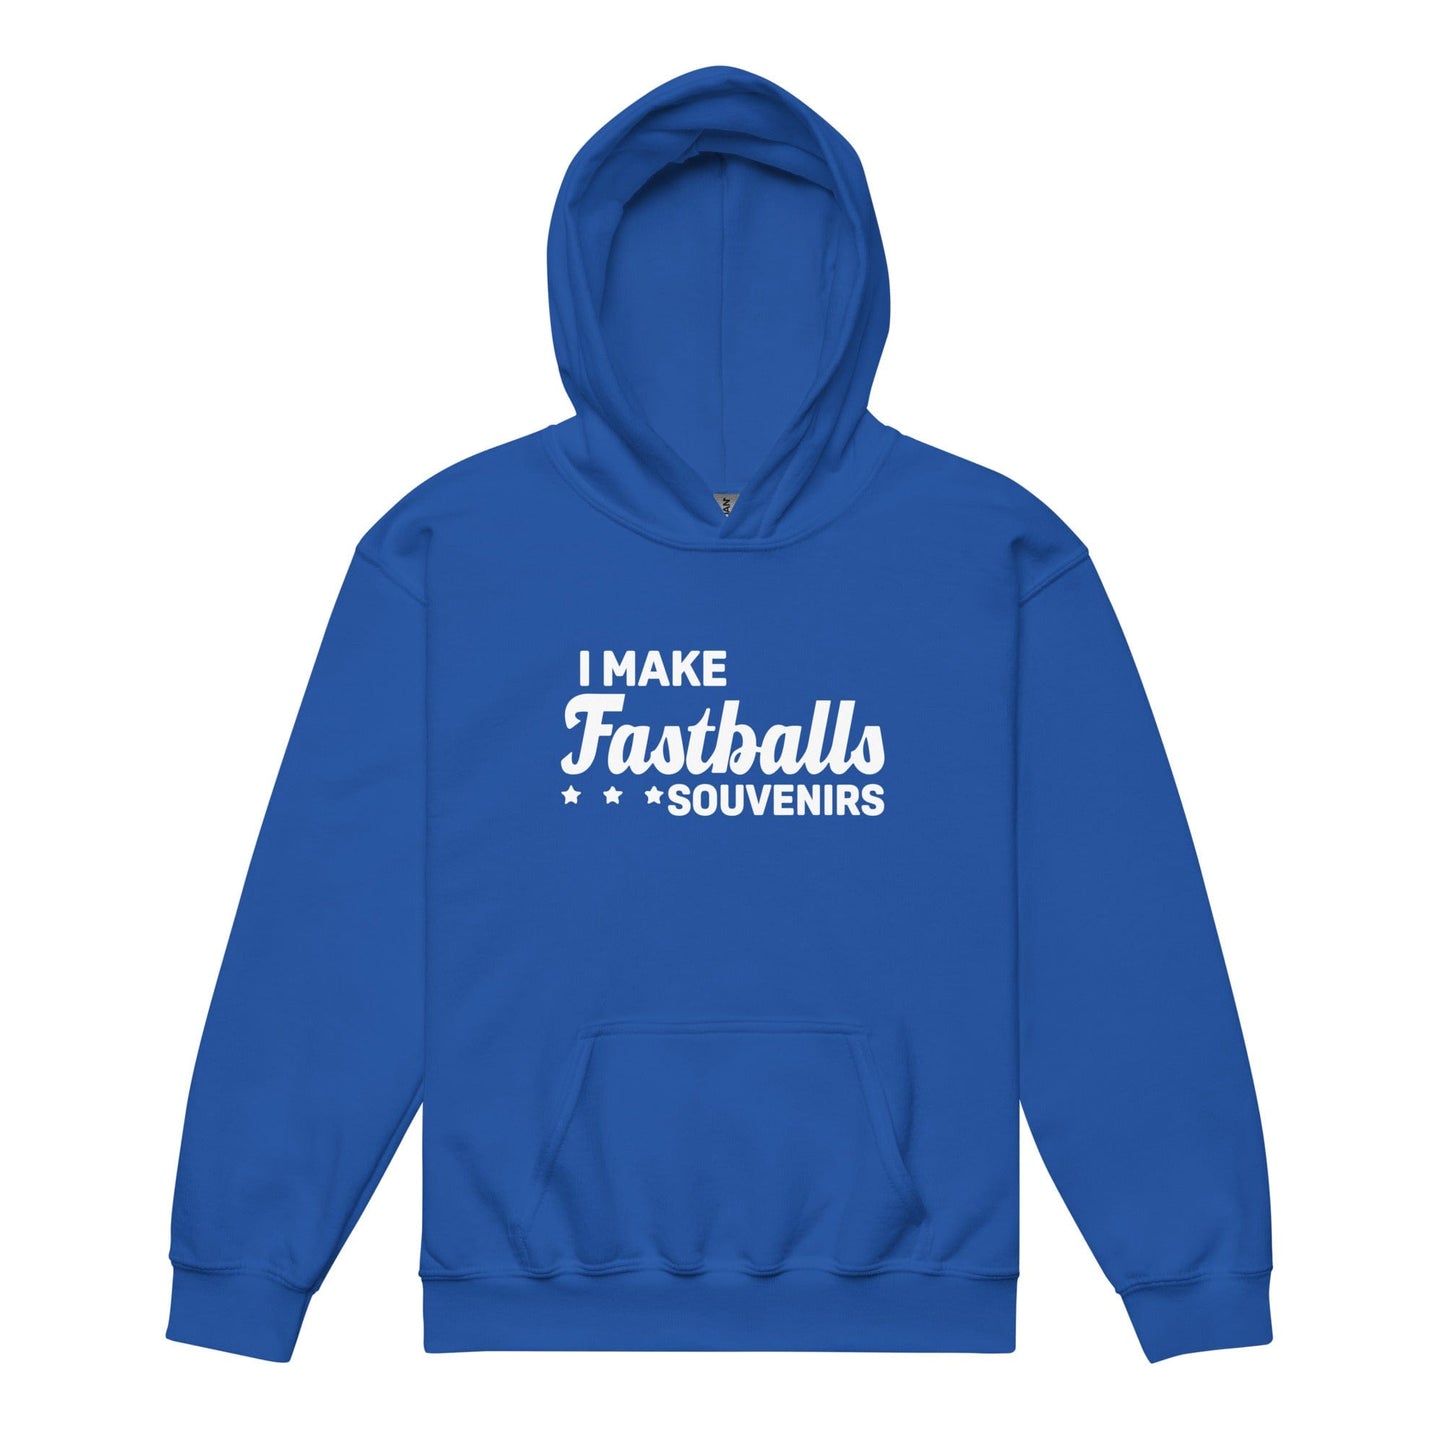 I Make Fastballs Souvenirs - Youth Hoodie